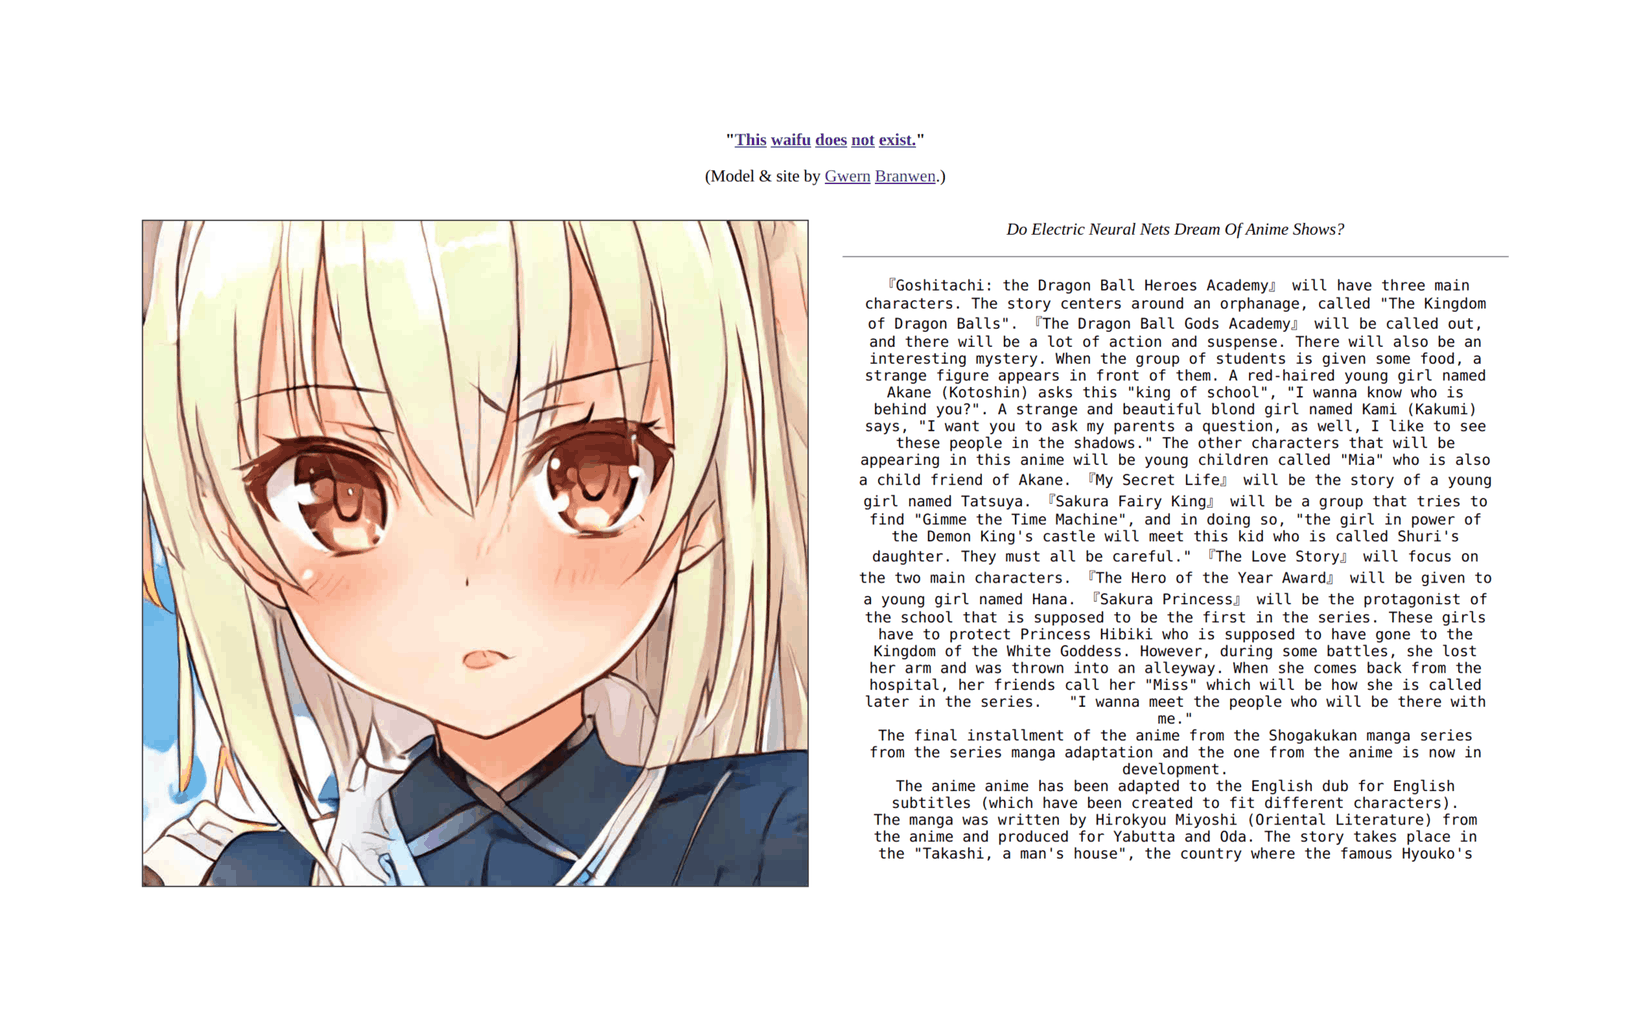 A screenshot of “This Waifu Does Not Exist” (TWDNE) showing a random StyleGAN-generated anime face and a random GPT-3 text sample conditioned on anime keywords/​​phrases.